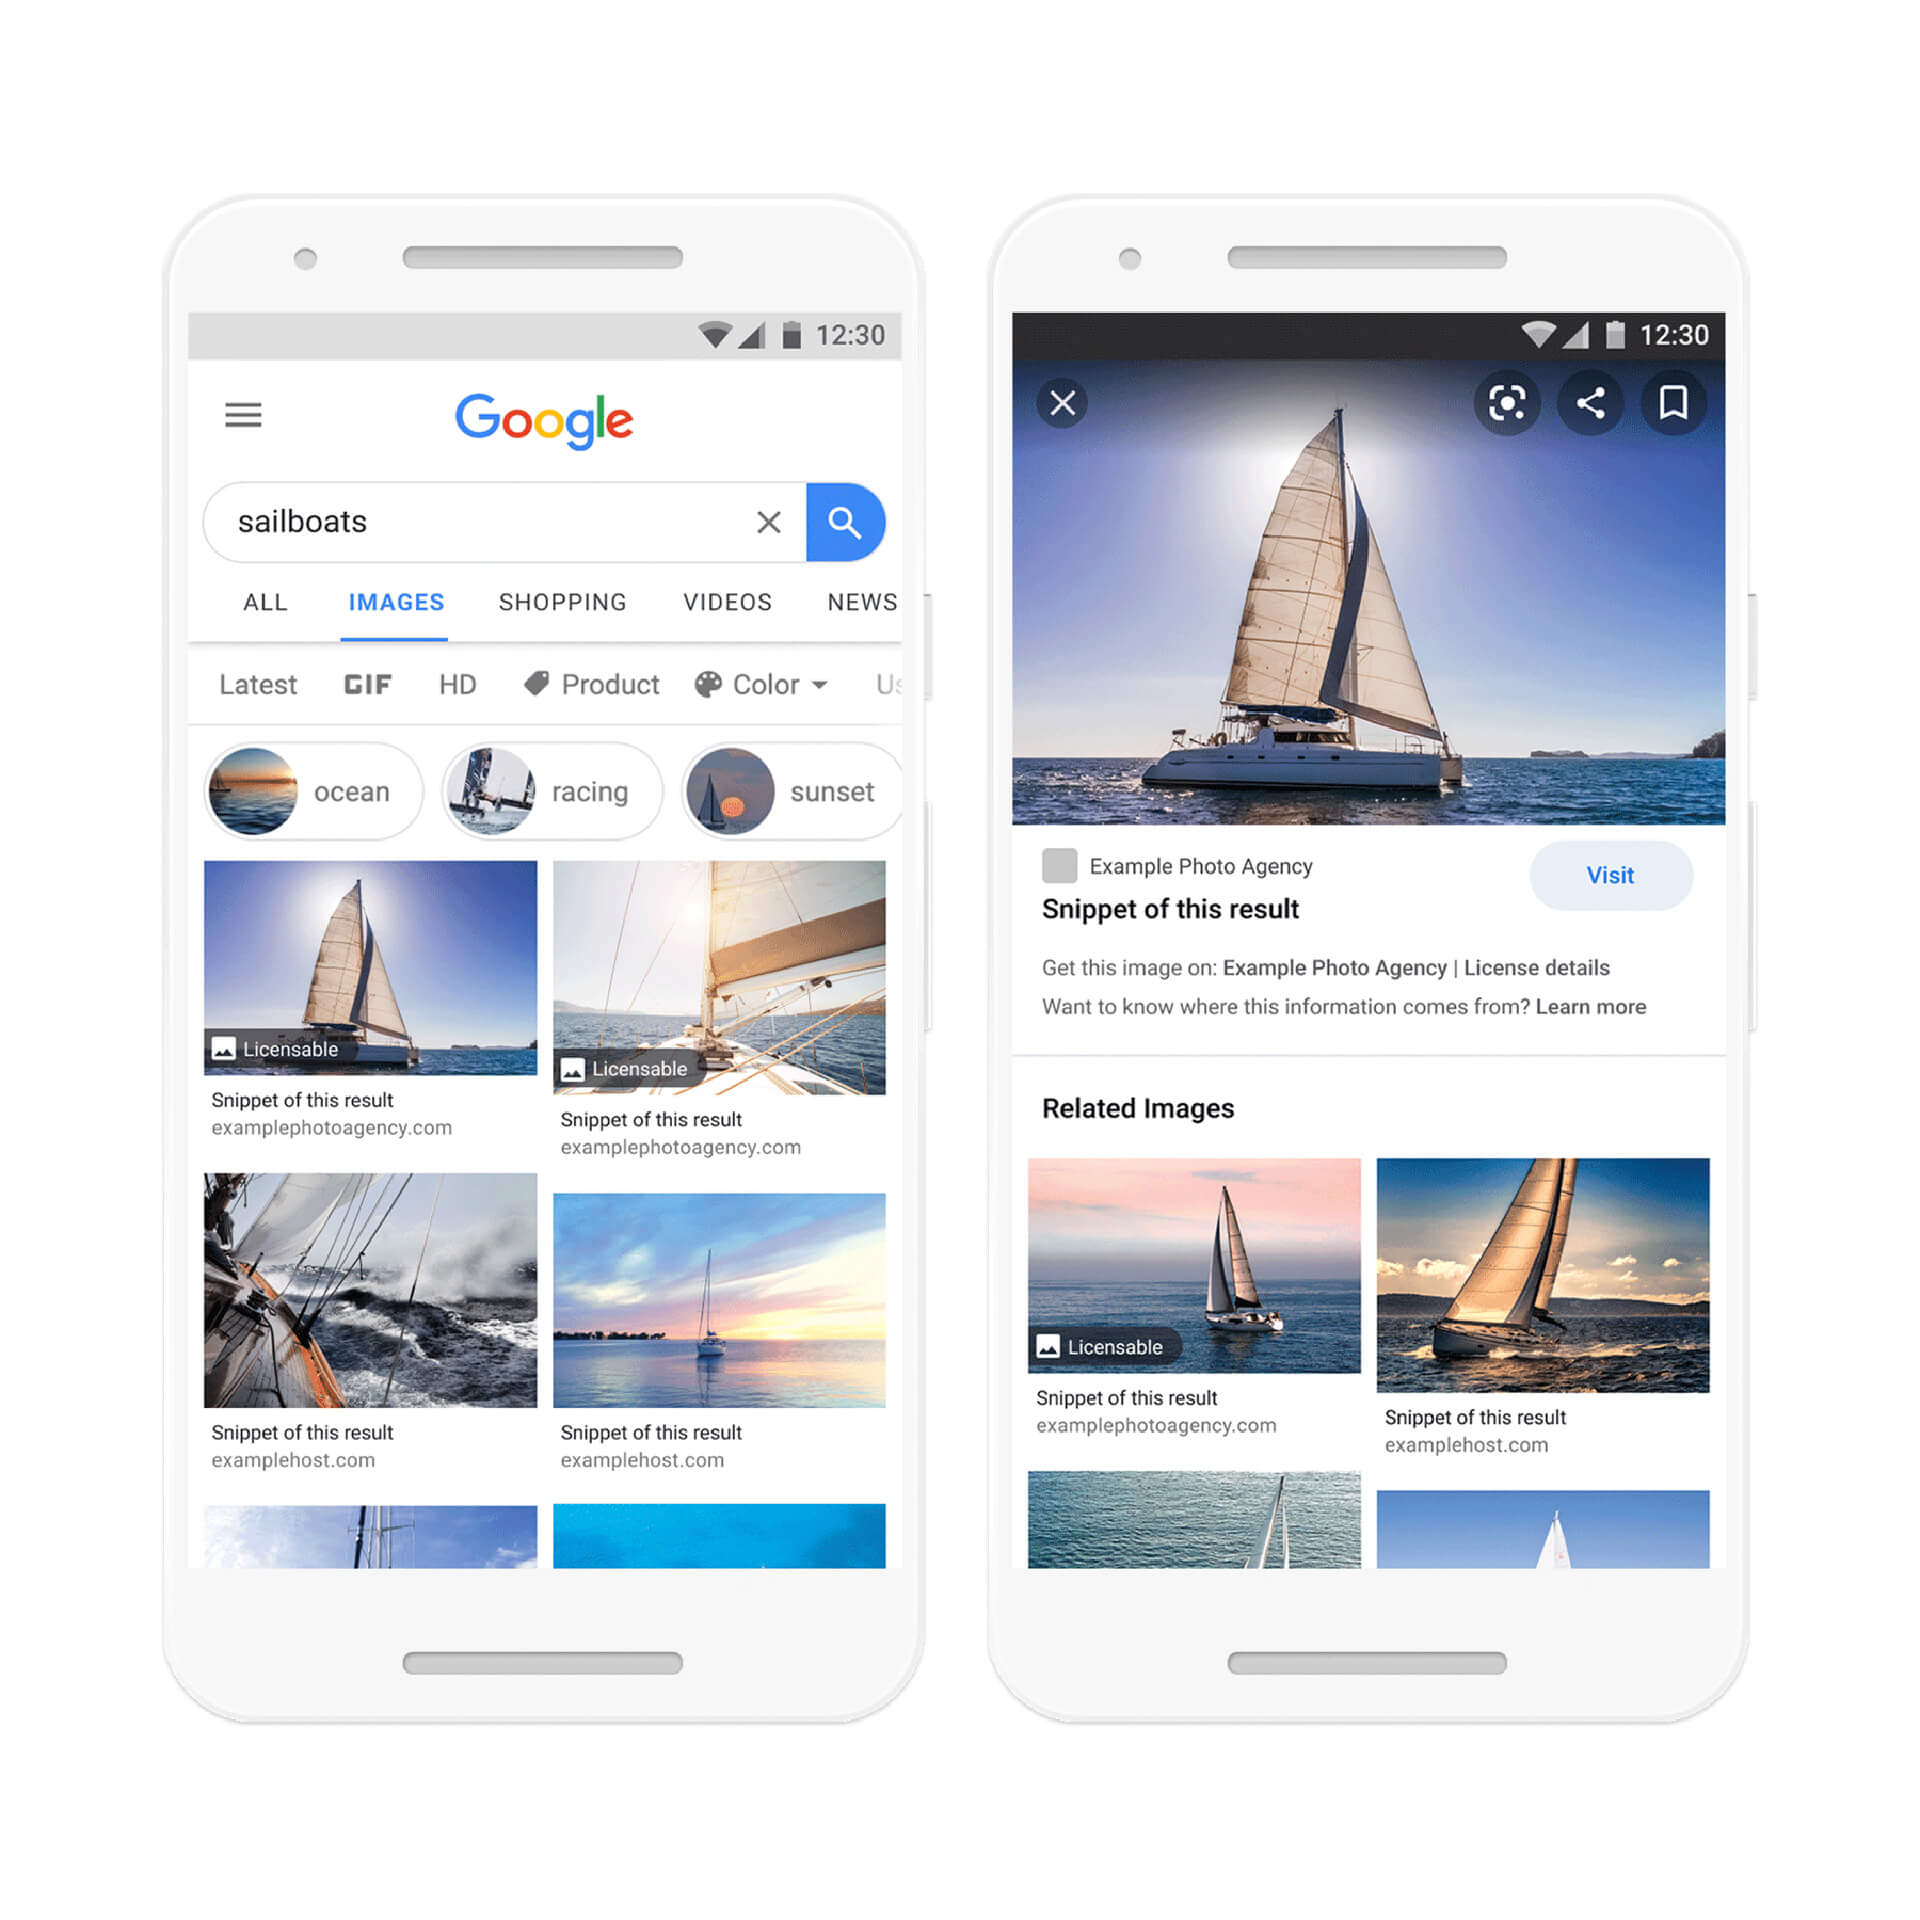 Google officially launches ‘licensable’ image label and filter in Image search - Search Engine Land